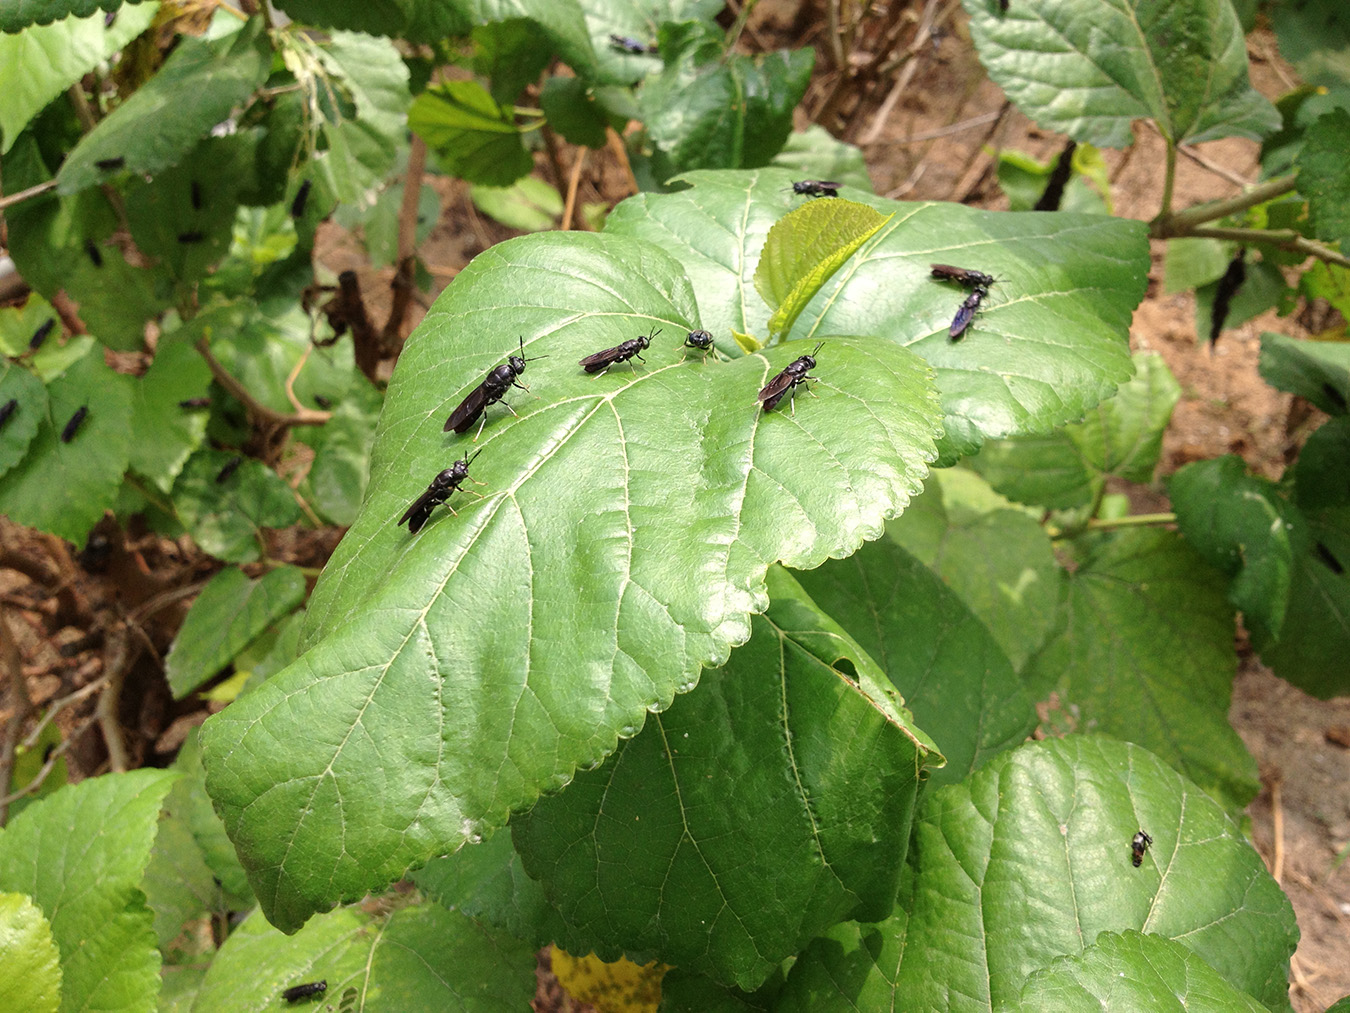 Adult larvae in the last week of their life cycle resting on leaves in the arboretum. Photo by Amy Zhang.